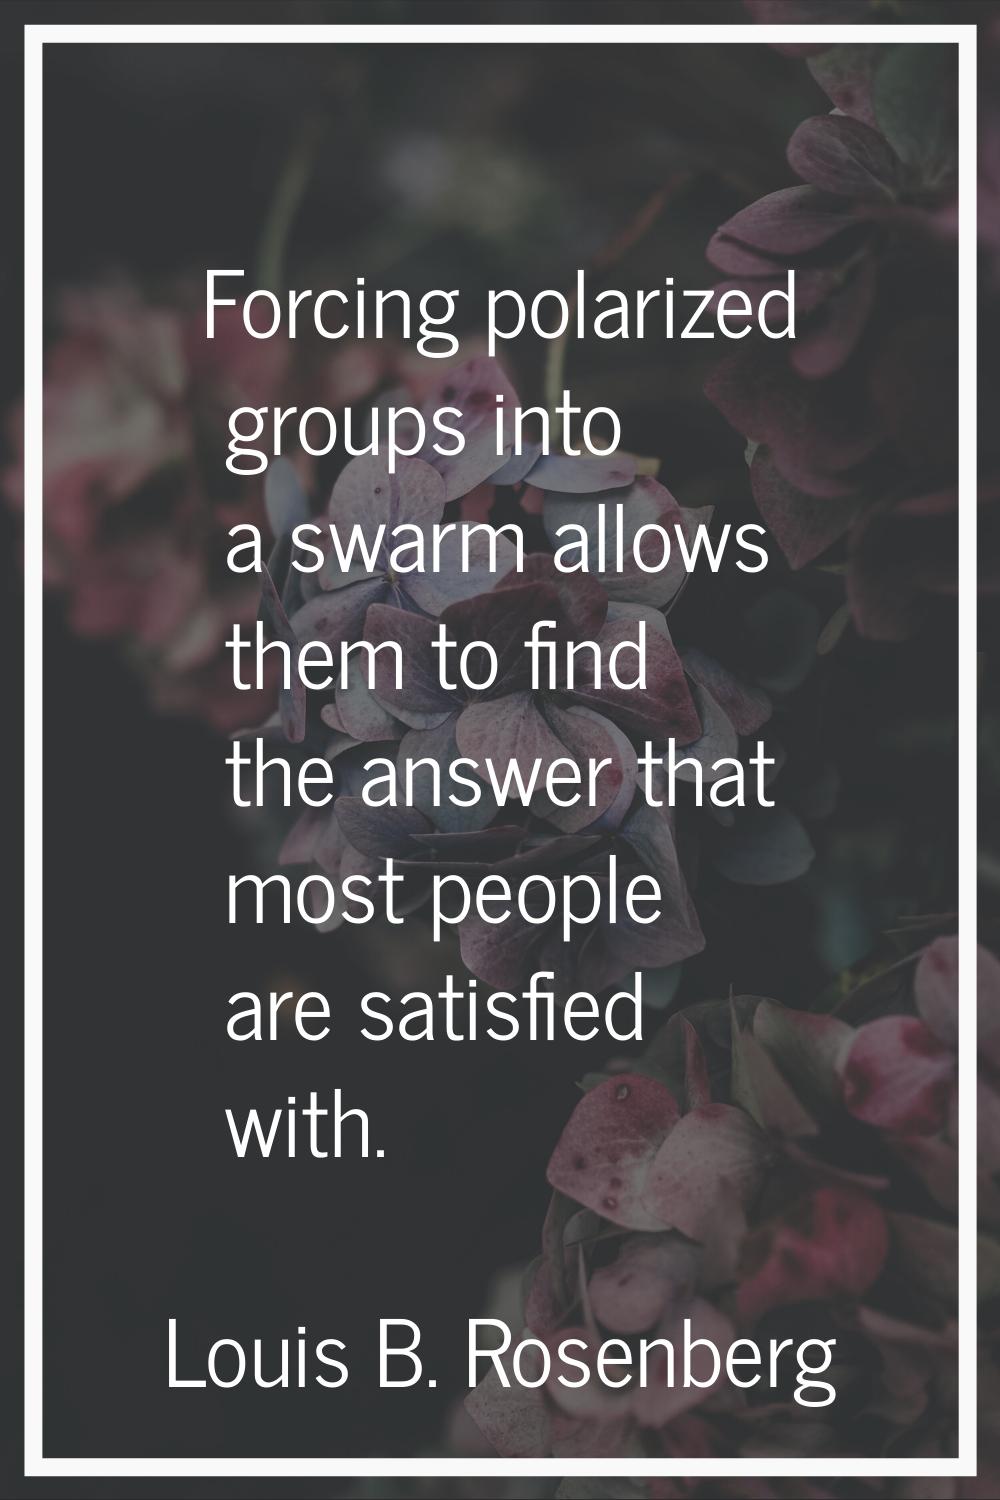 Forcing polarized groups into a swarm allows them to find the answer that most people are satisfied